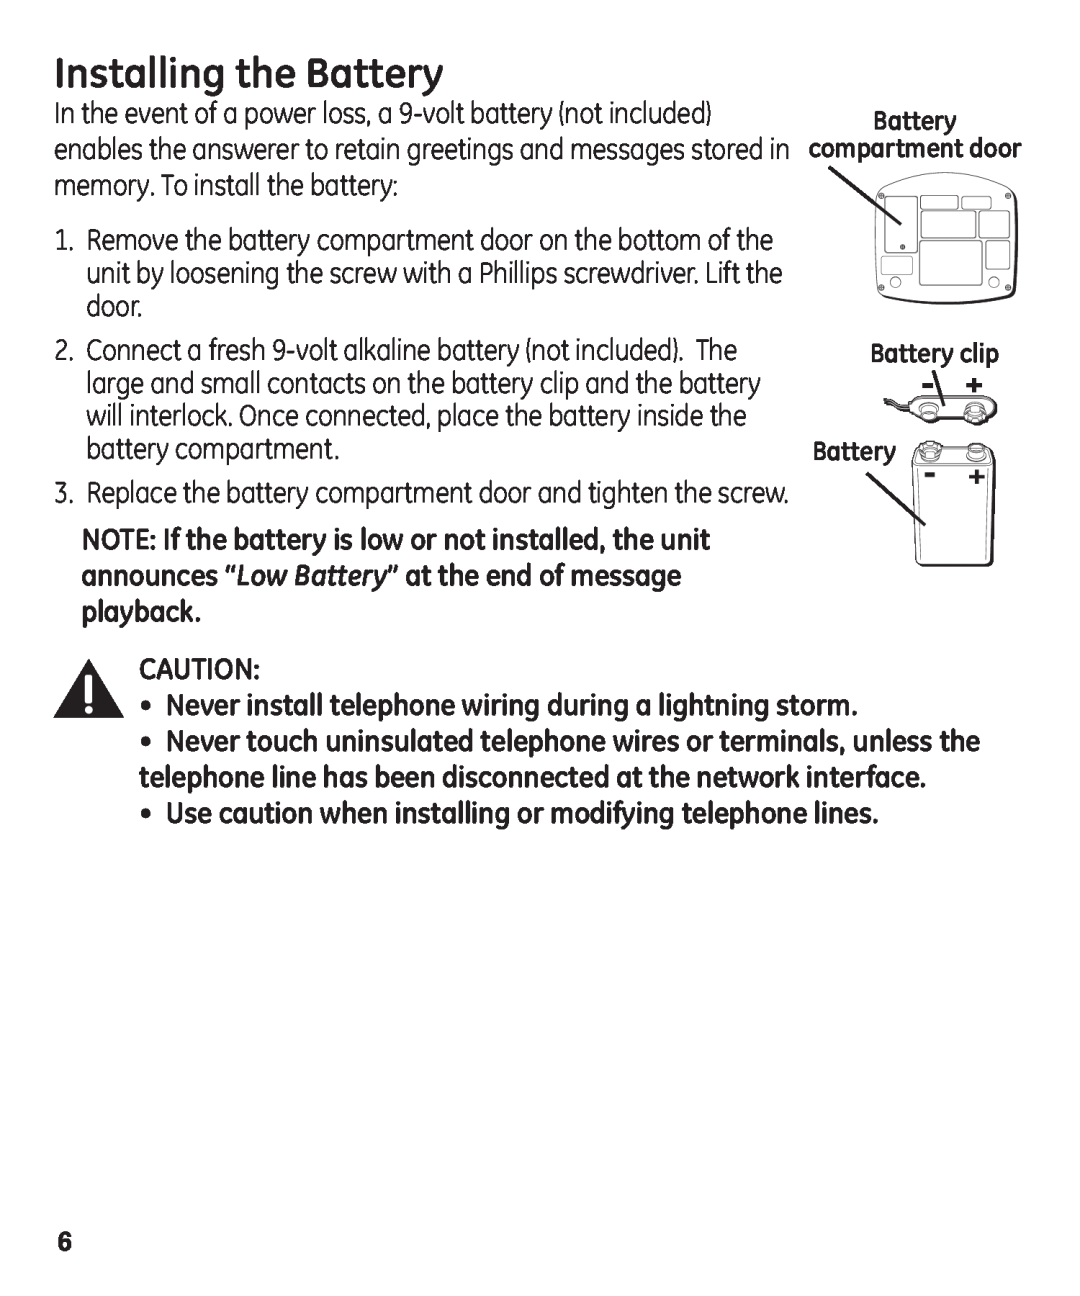 GE 29861 manual Installing the Battery, Never install telephone wiring during a lightning storm 